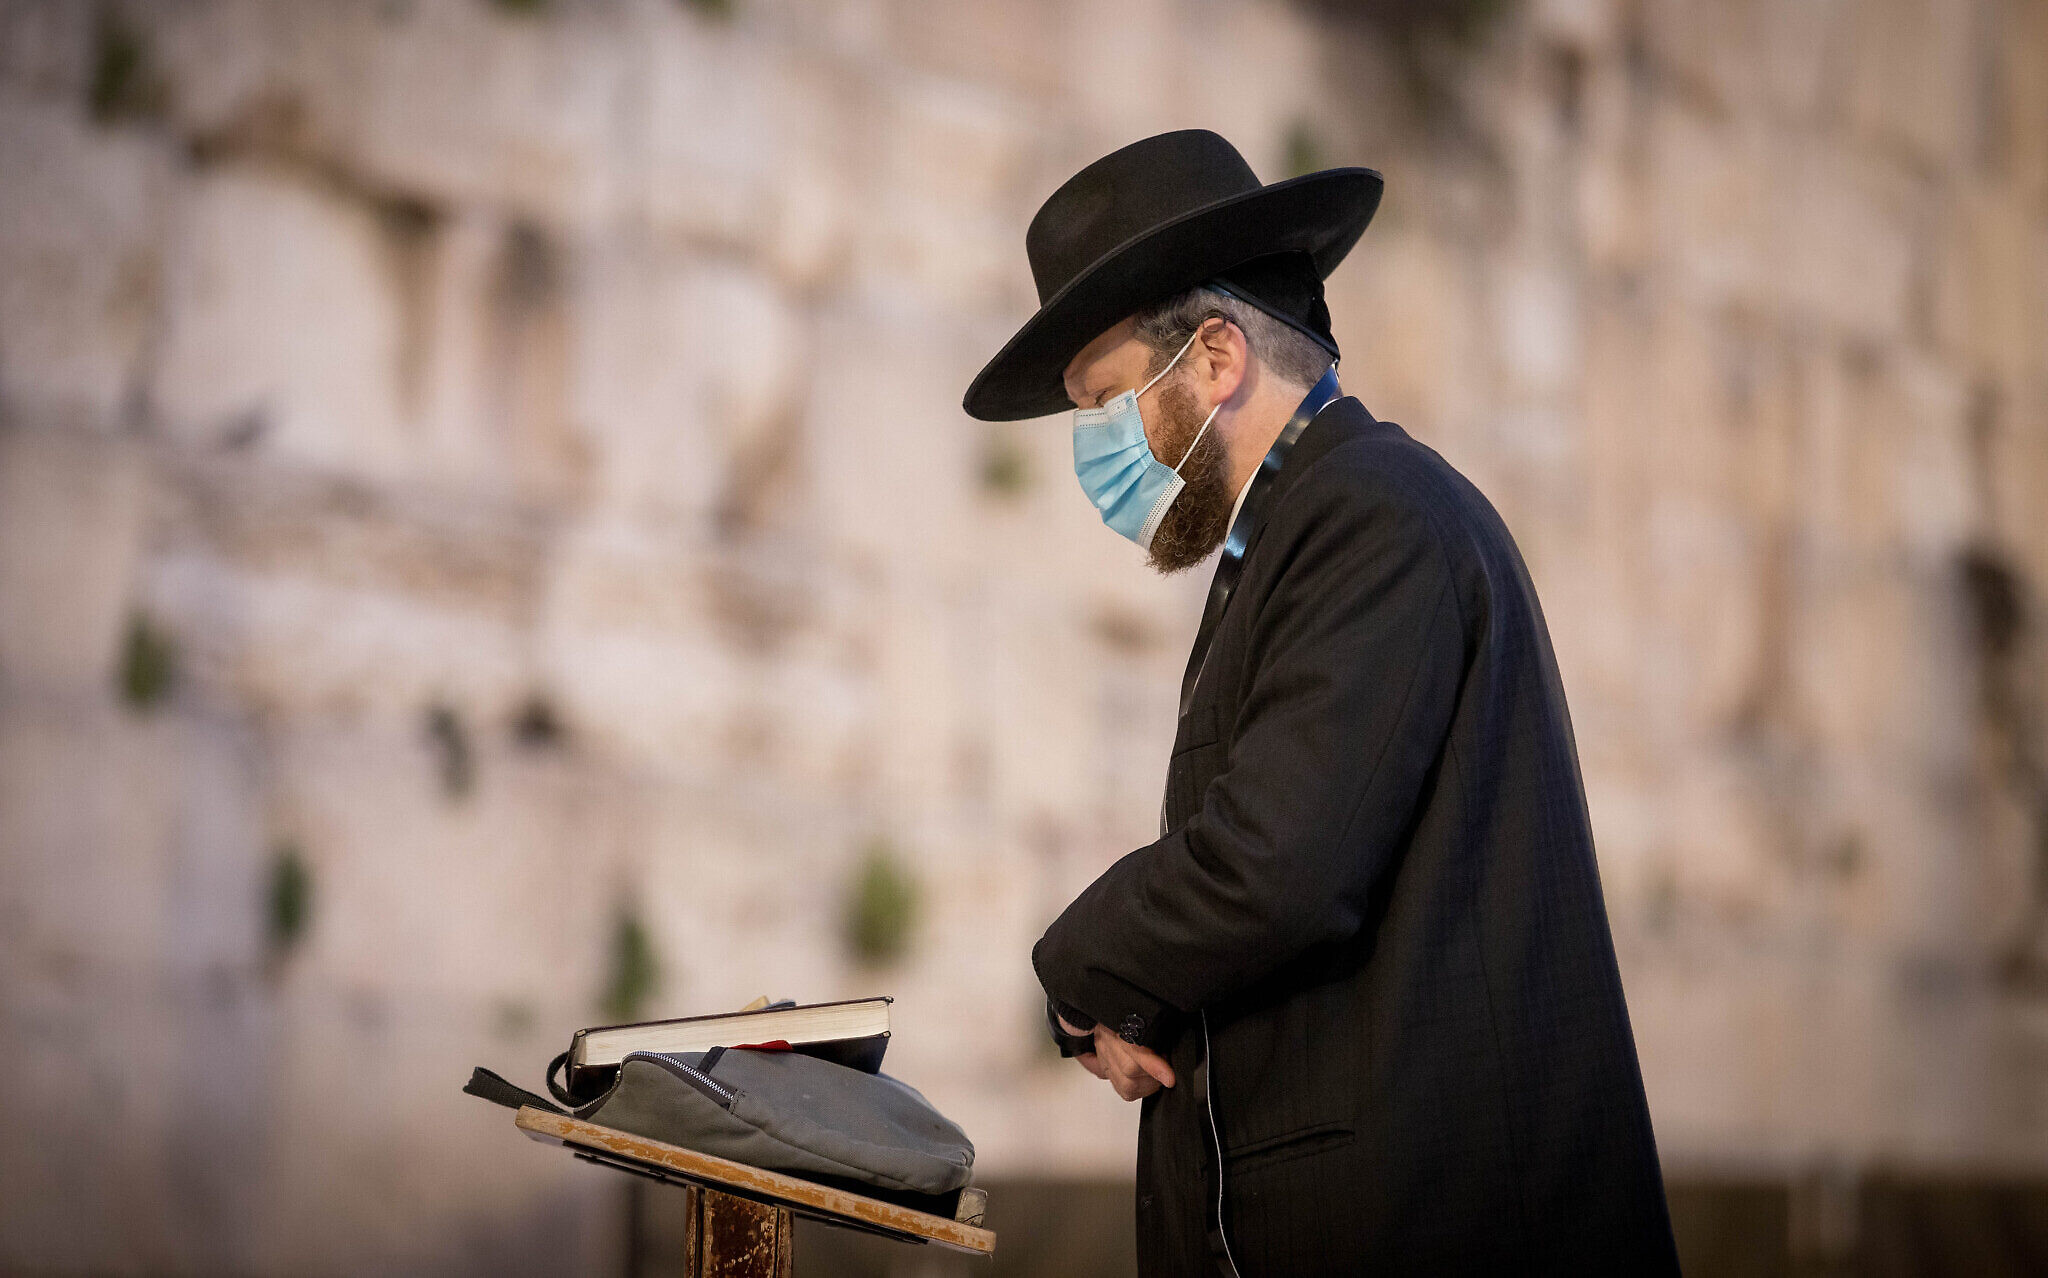 A Haredi man prays at the almost empty Western Wall, Judaism's holiest prayer site, in the Old City of Jerusalem, April 7, 2020. (Nati Shohat/Flash90)